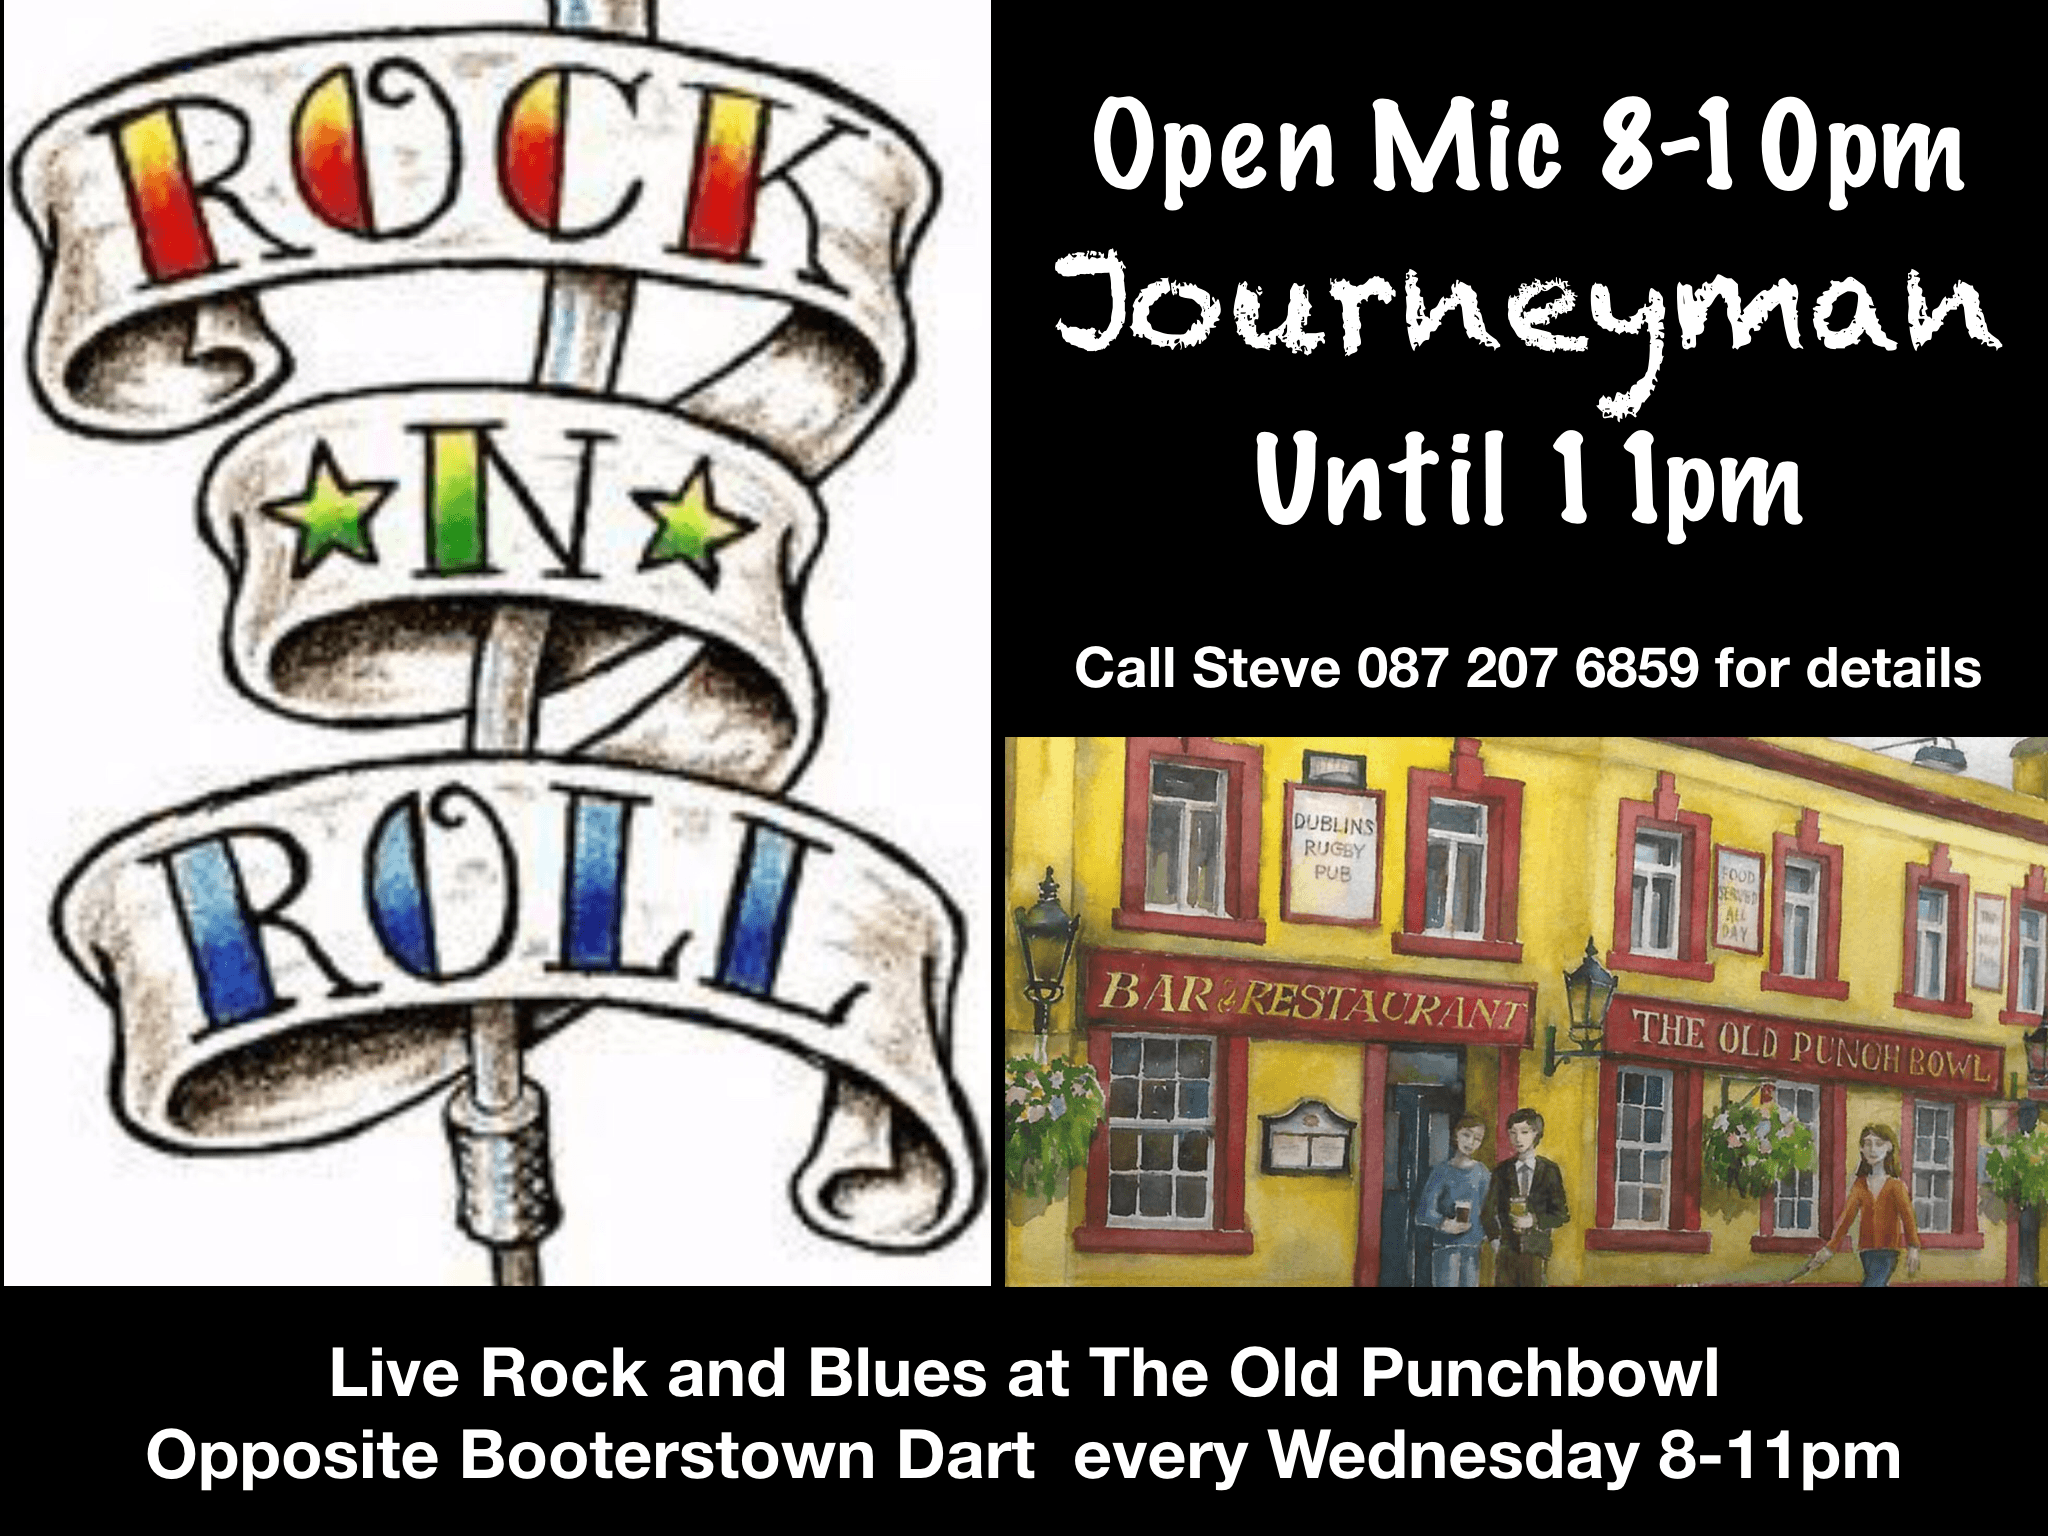 Rock & Blues night at the The Old Punchbowl